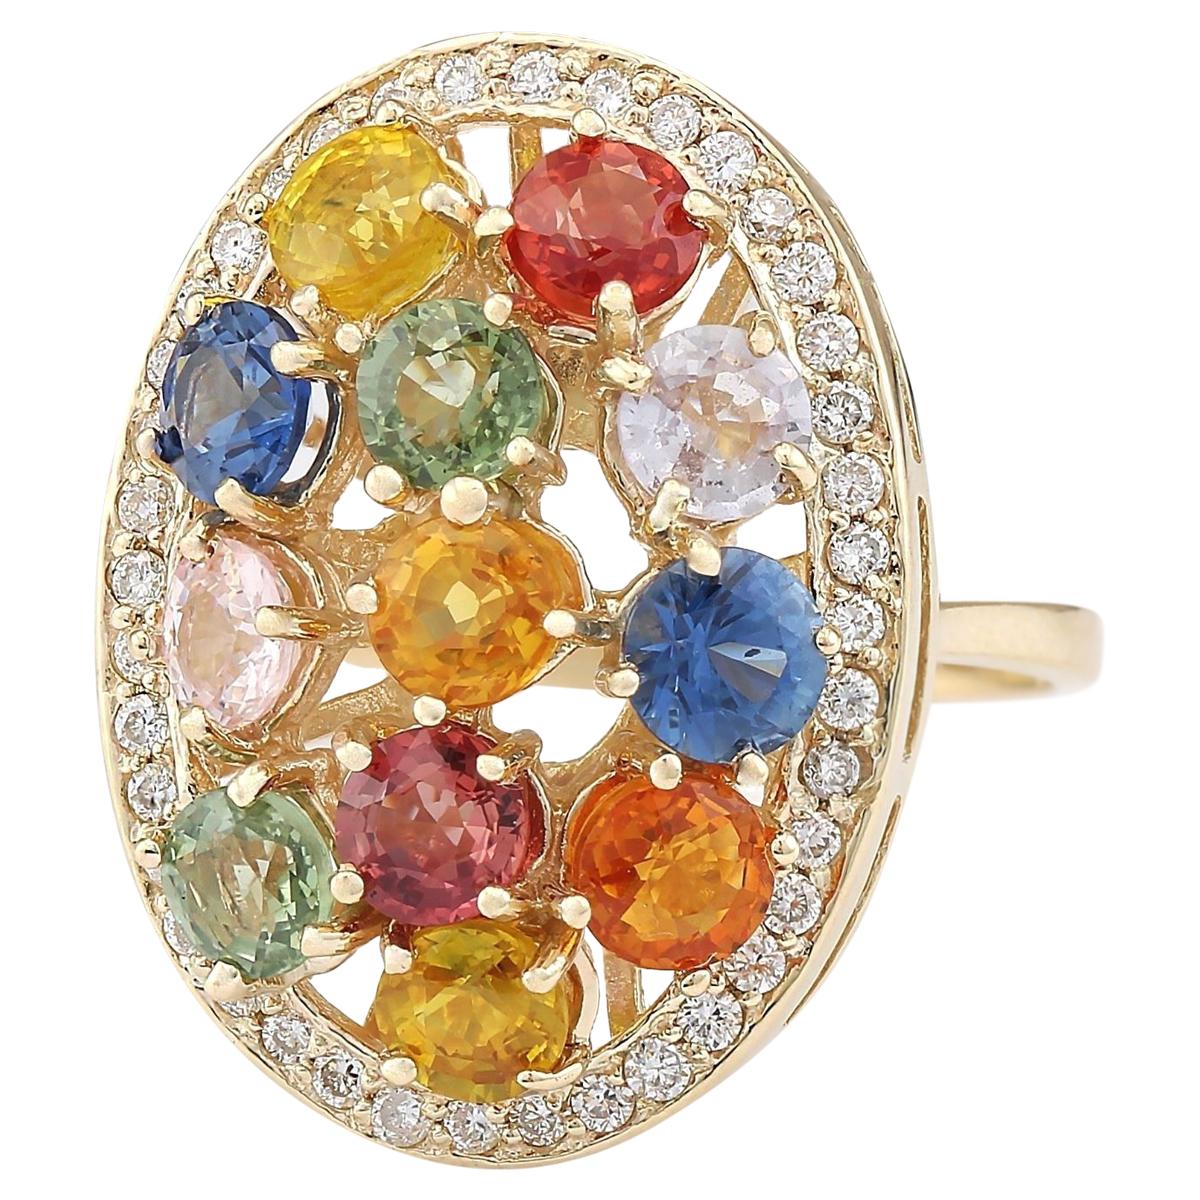 5.72 Carat Natural Sapphire 14 Karat Yellow Gold Diamond Ring
Stamped: 14K Yellow Gold
Total Ring Weight: 7.5 Grams
Total Natural Sapphire Weight is 5.22 Carat
Color: Multicolor
Total Natural Diamond Weight is 0.50 Carat
Color: F-G, Clarity: